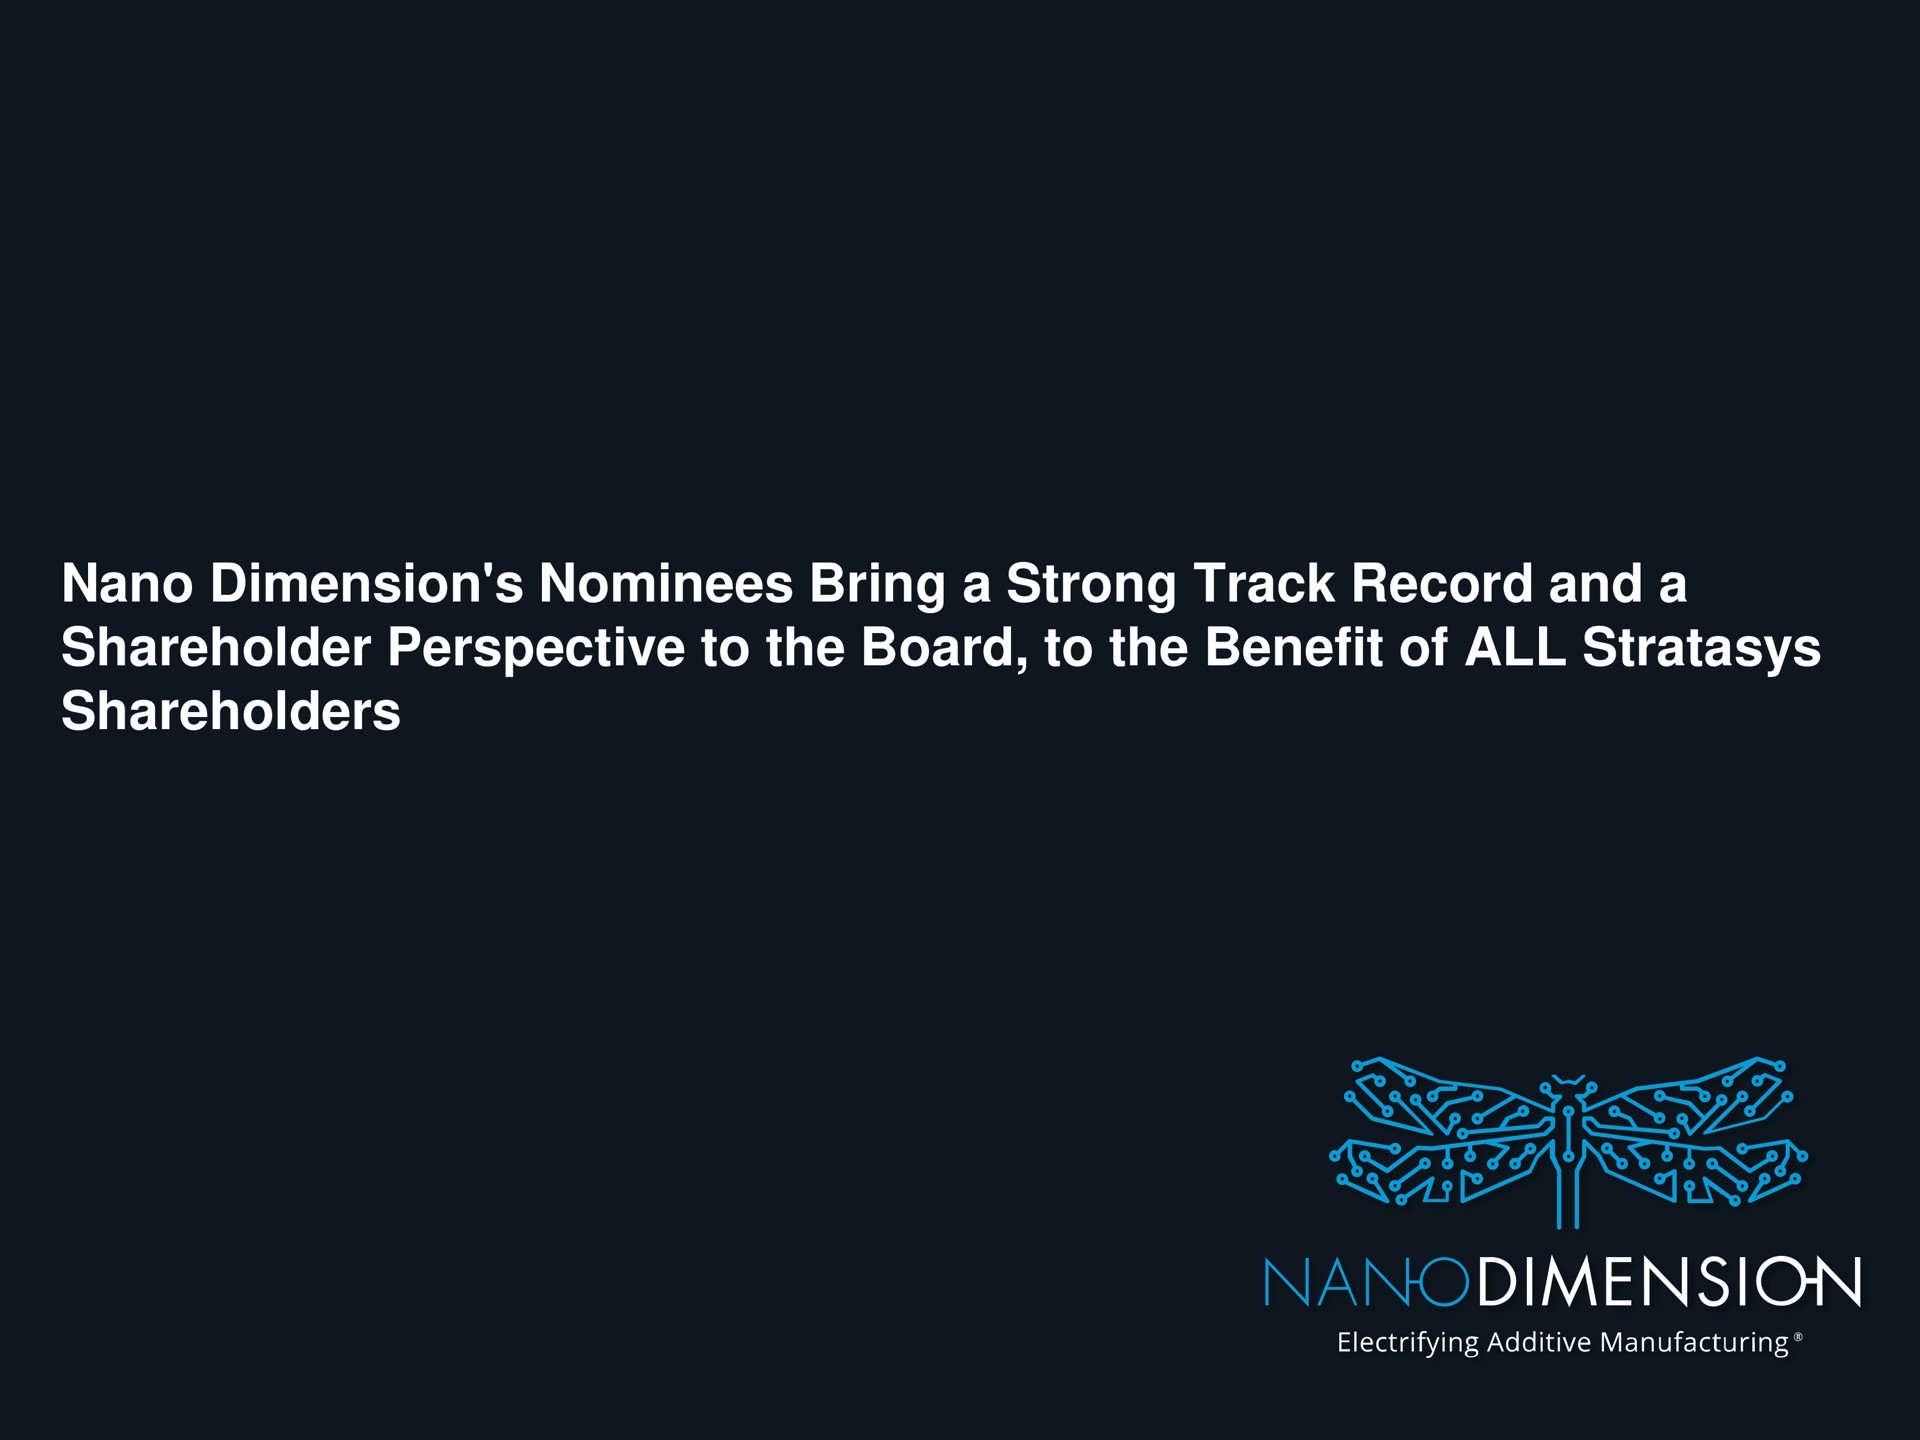 dimension nominees bring a strong track record and a shareholder perspective to the board to the benefit of all shareholders | Nano Dimension